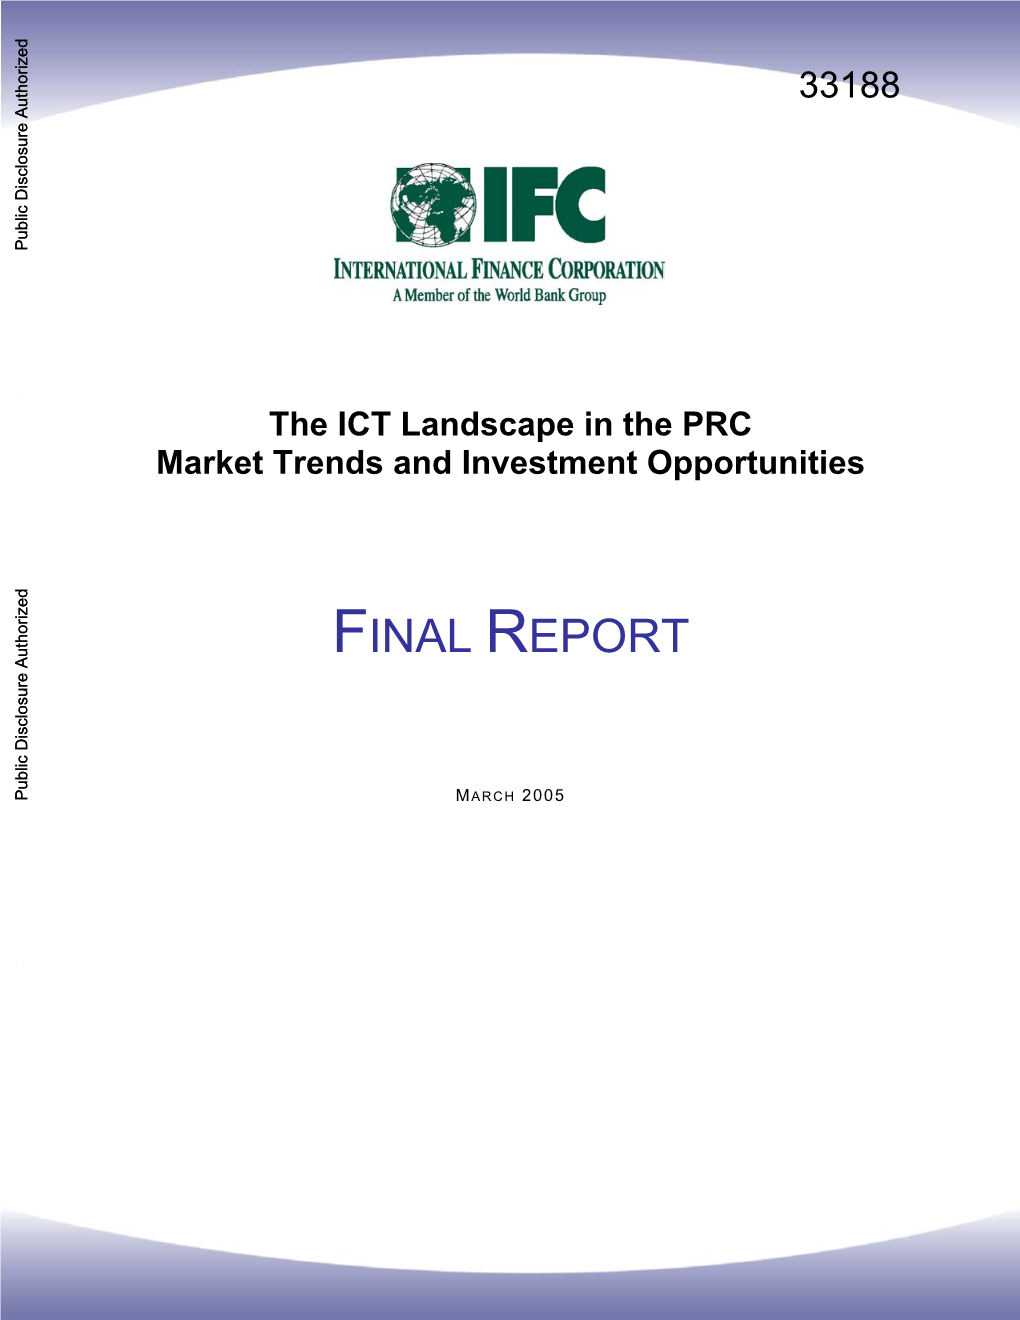 The ICT Landscape in the PRC Market Trends and Investment Opportunities